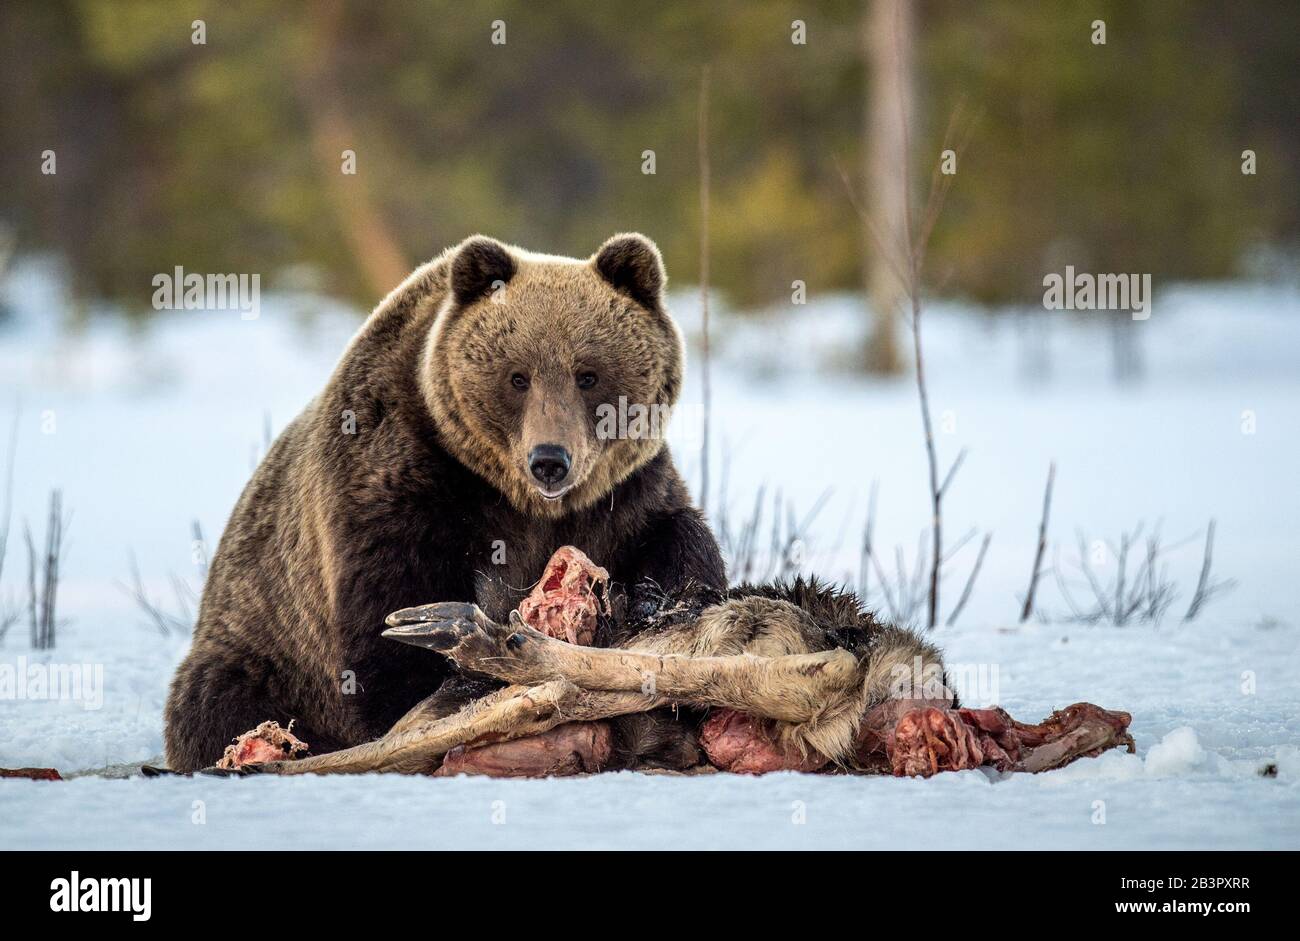 Brown bear awoke from hibernation, eats the moose's corpse. A brown bear in the forest. Adult Big Brown Bear Male. Scientific name: Ursus arctos. Stock Photo